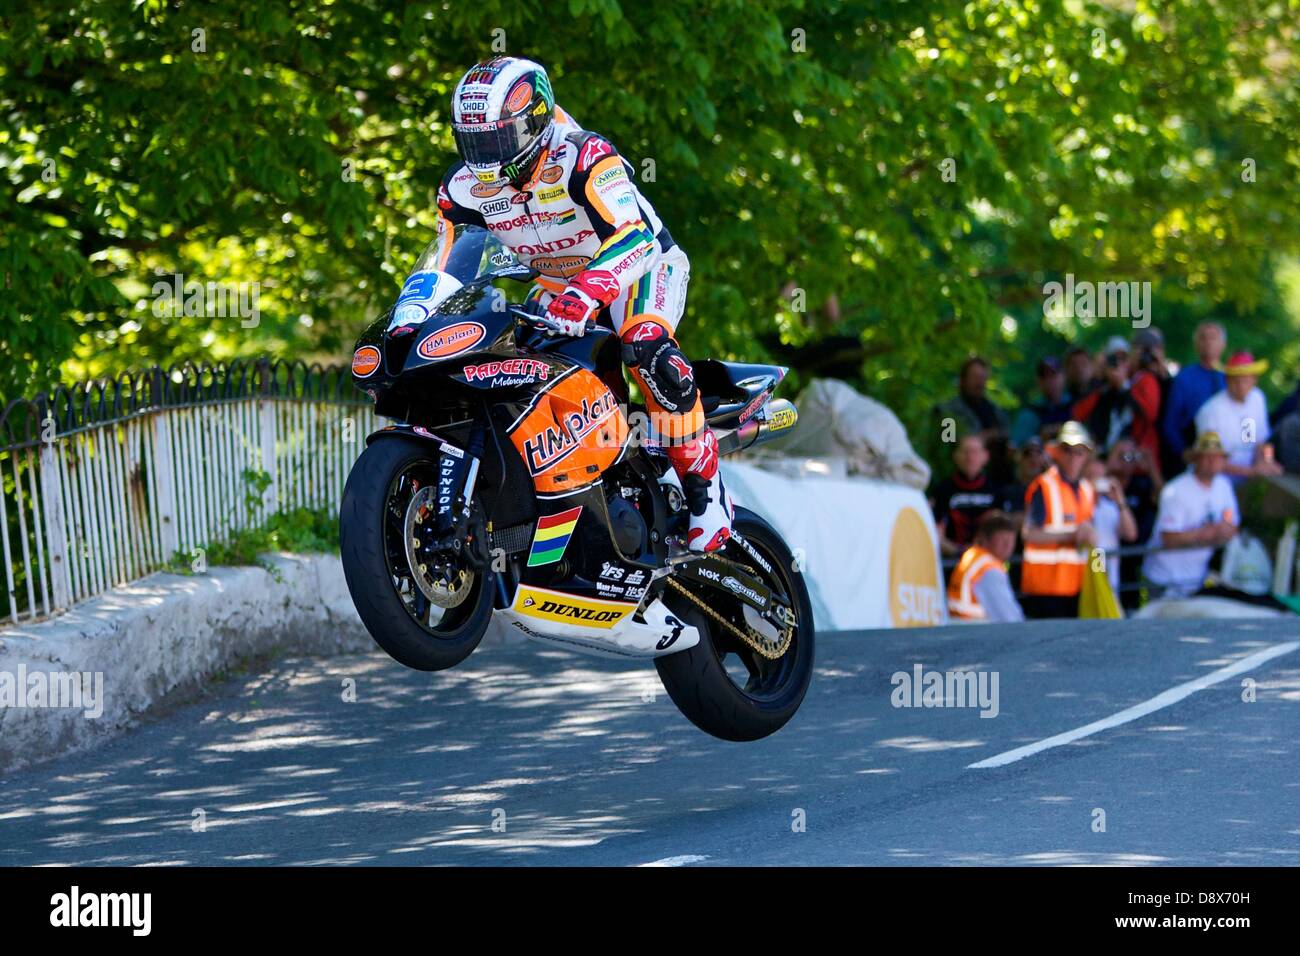 Isle of Man, UK. 5th June, 2013. John McGuinness during the Monster Energy Supersport race at the Isle of Man TT. Stock Photo